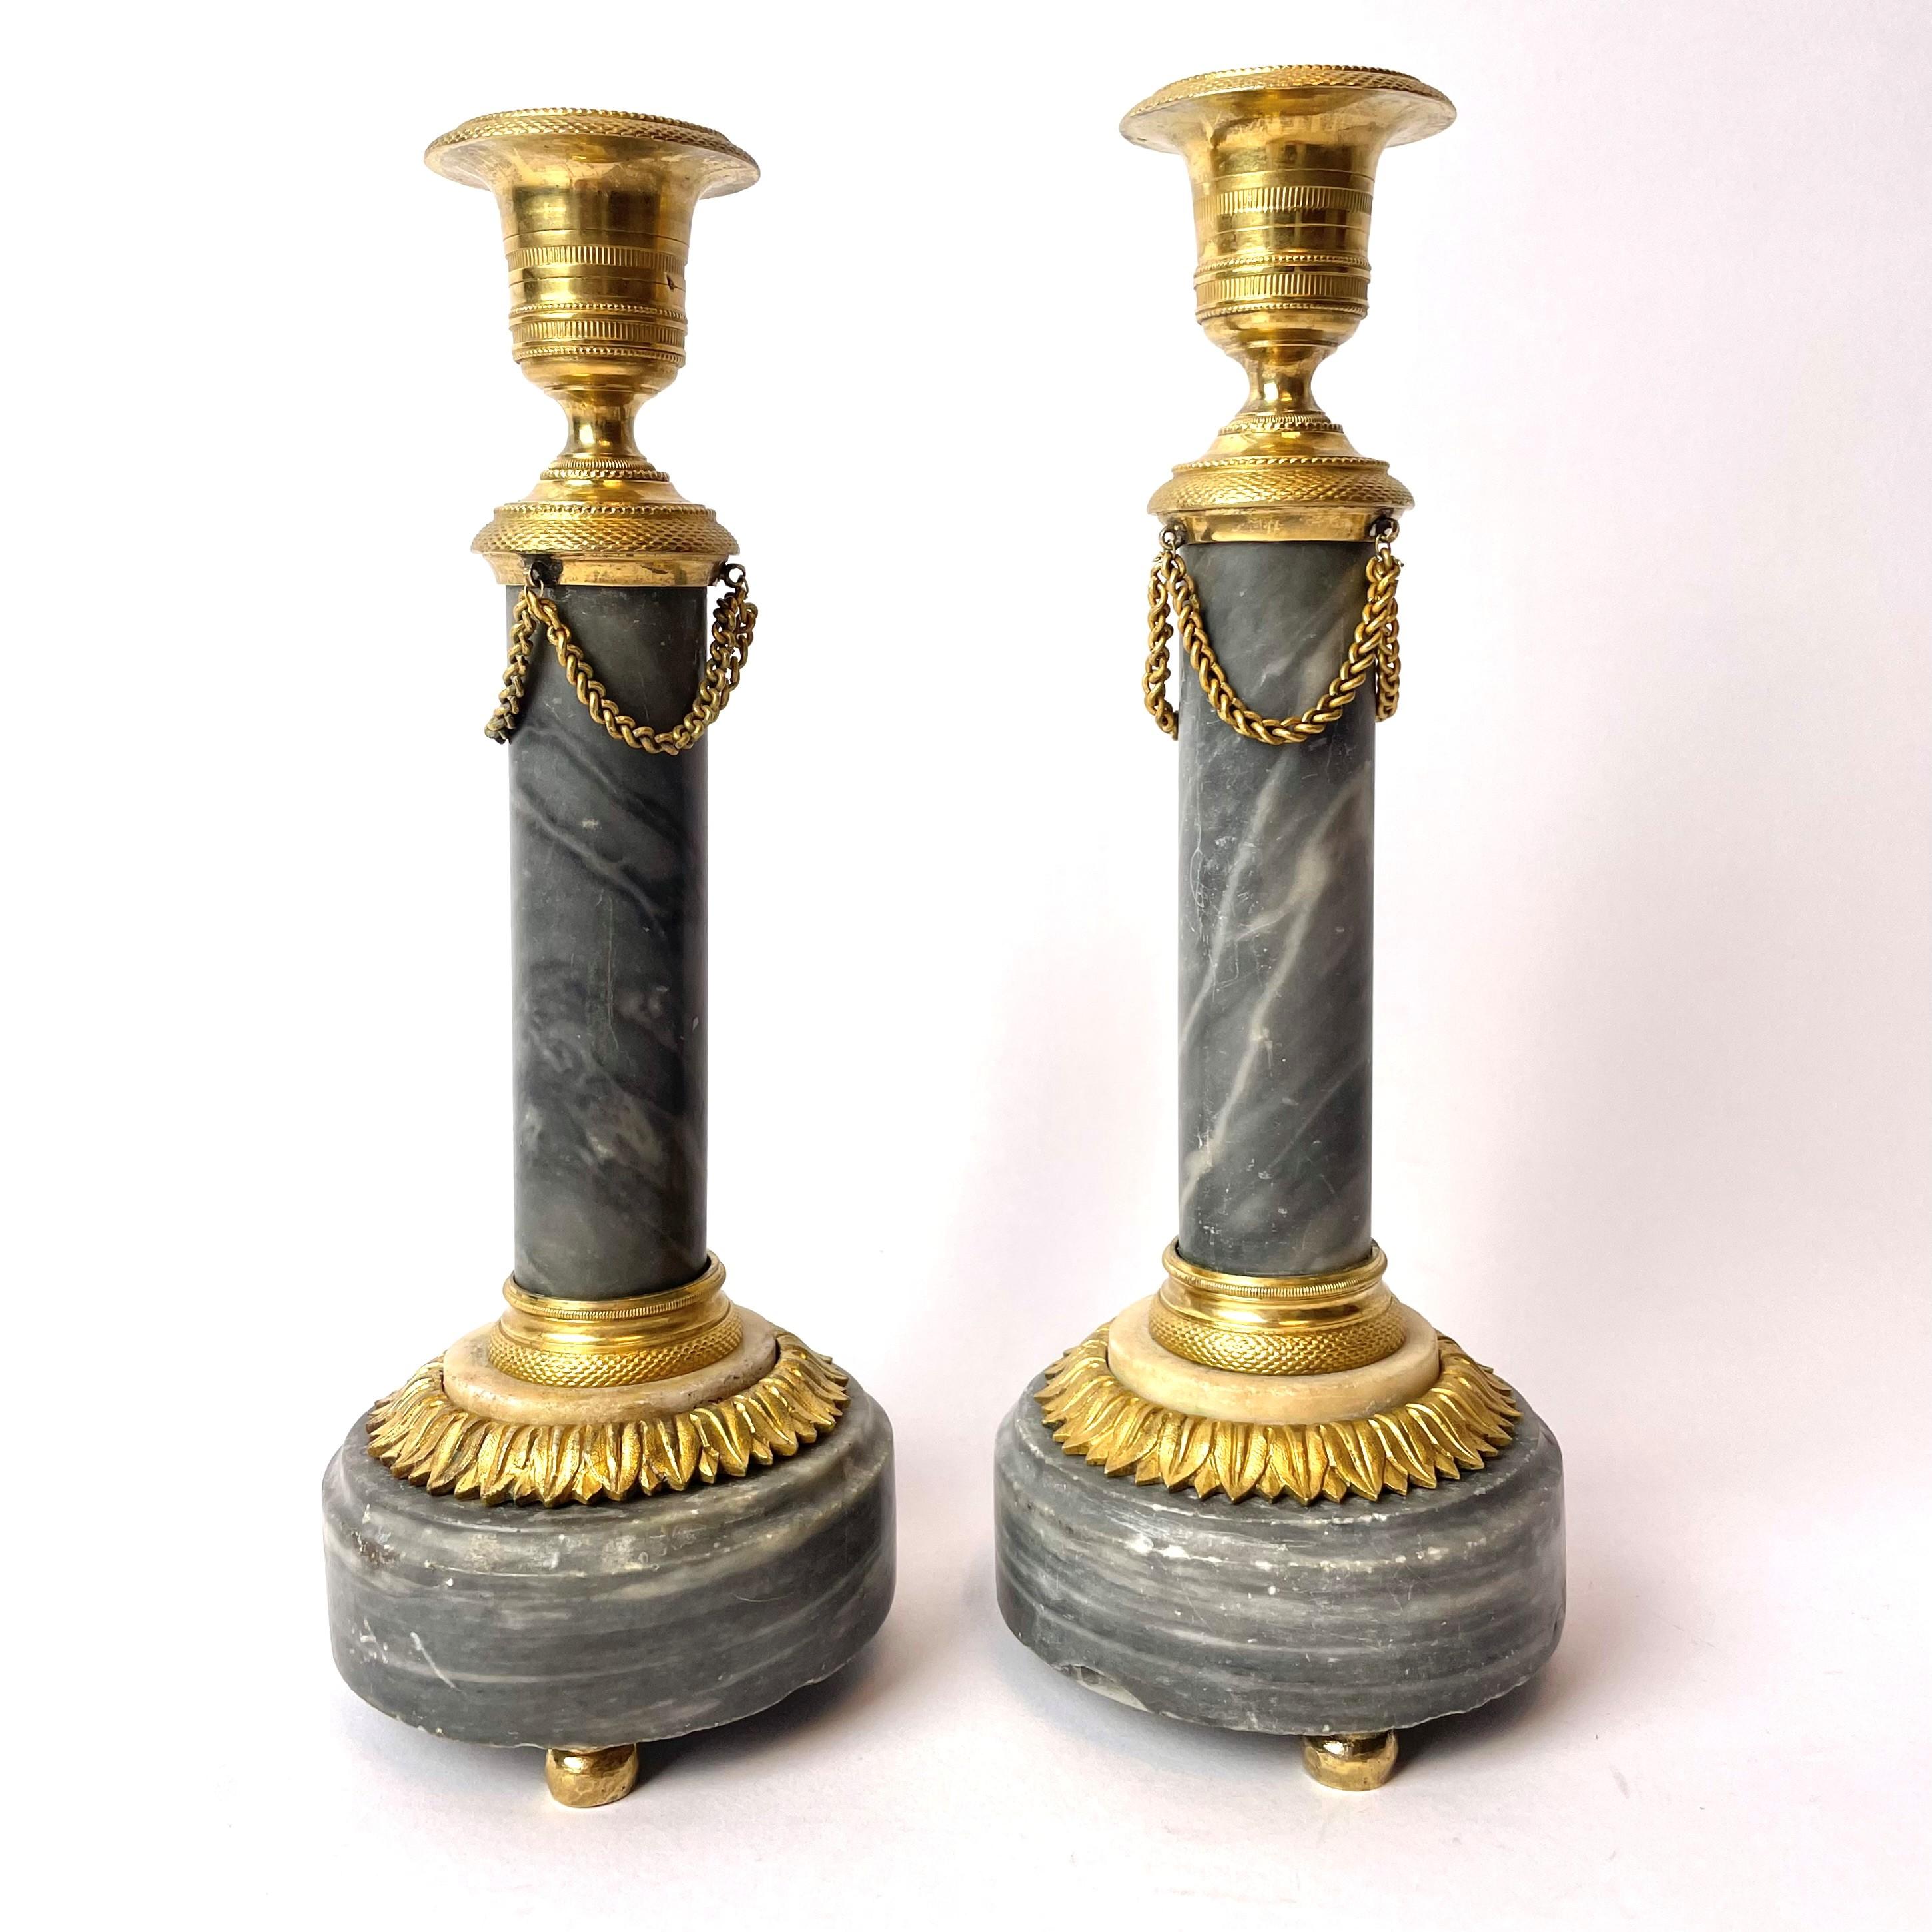 A beautiful pair of French candlesticks in Louis XVI, circa 1780. The candlesticks are made of Bleu Turquin marble with beautifully patinated details of gilded bronze.

Wear consistent with age and use.